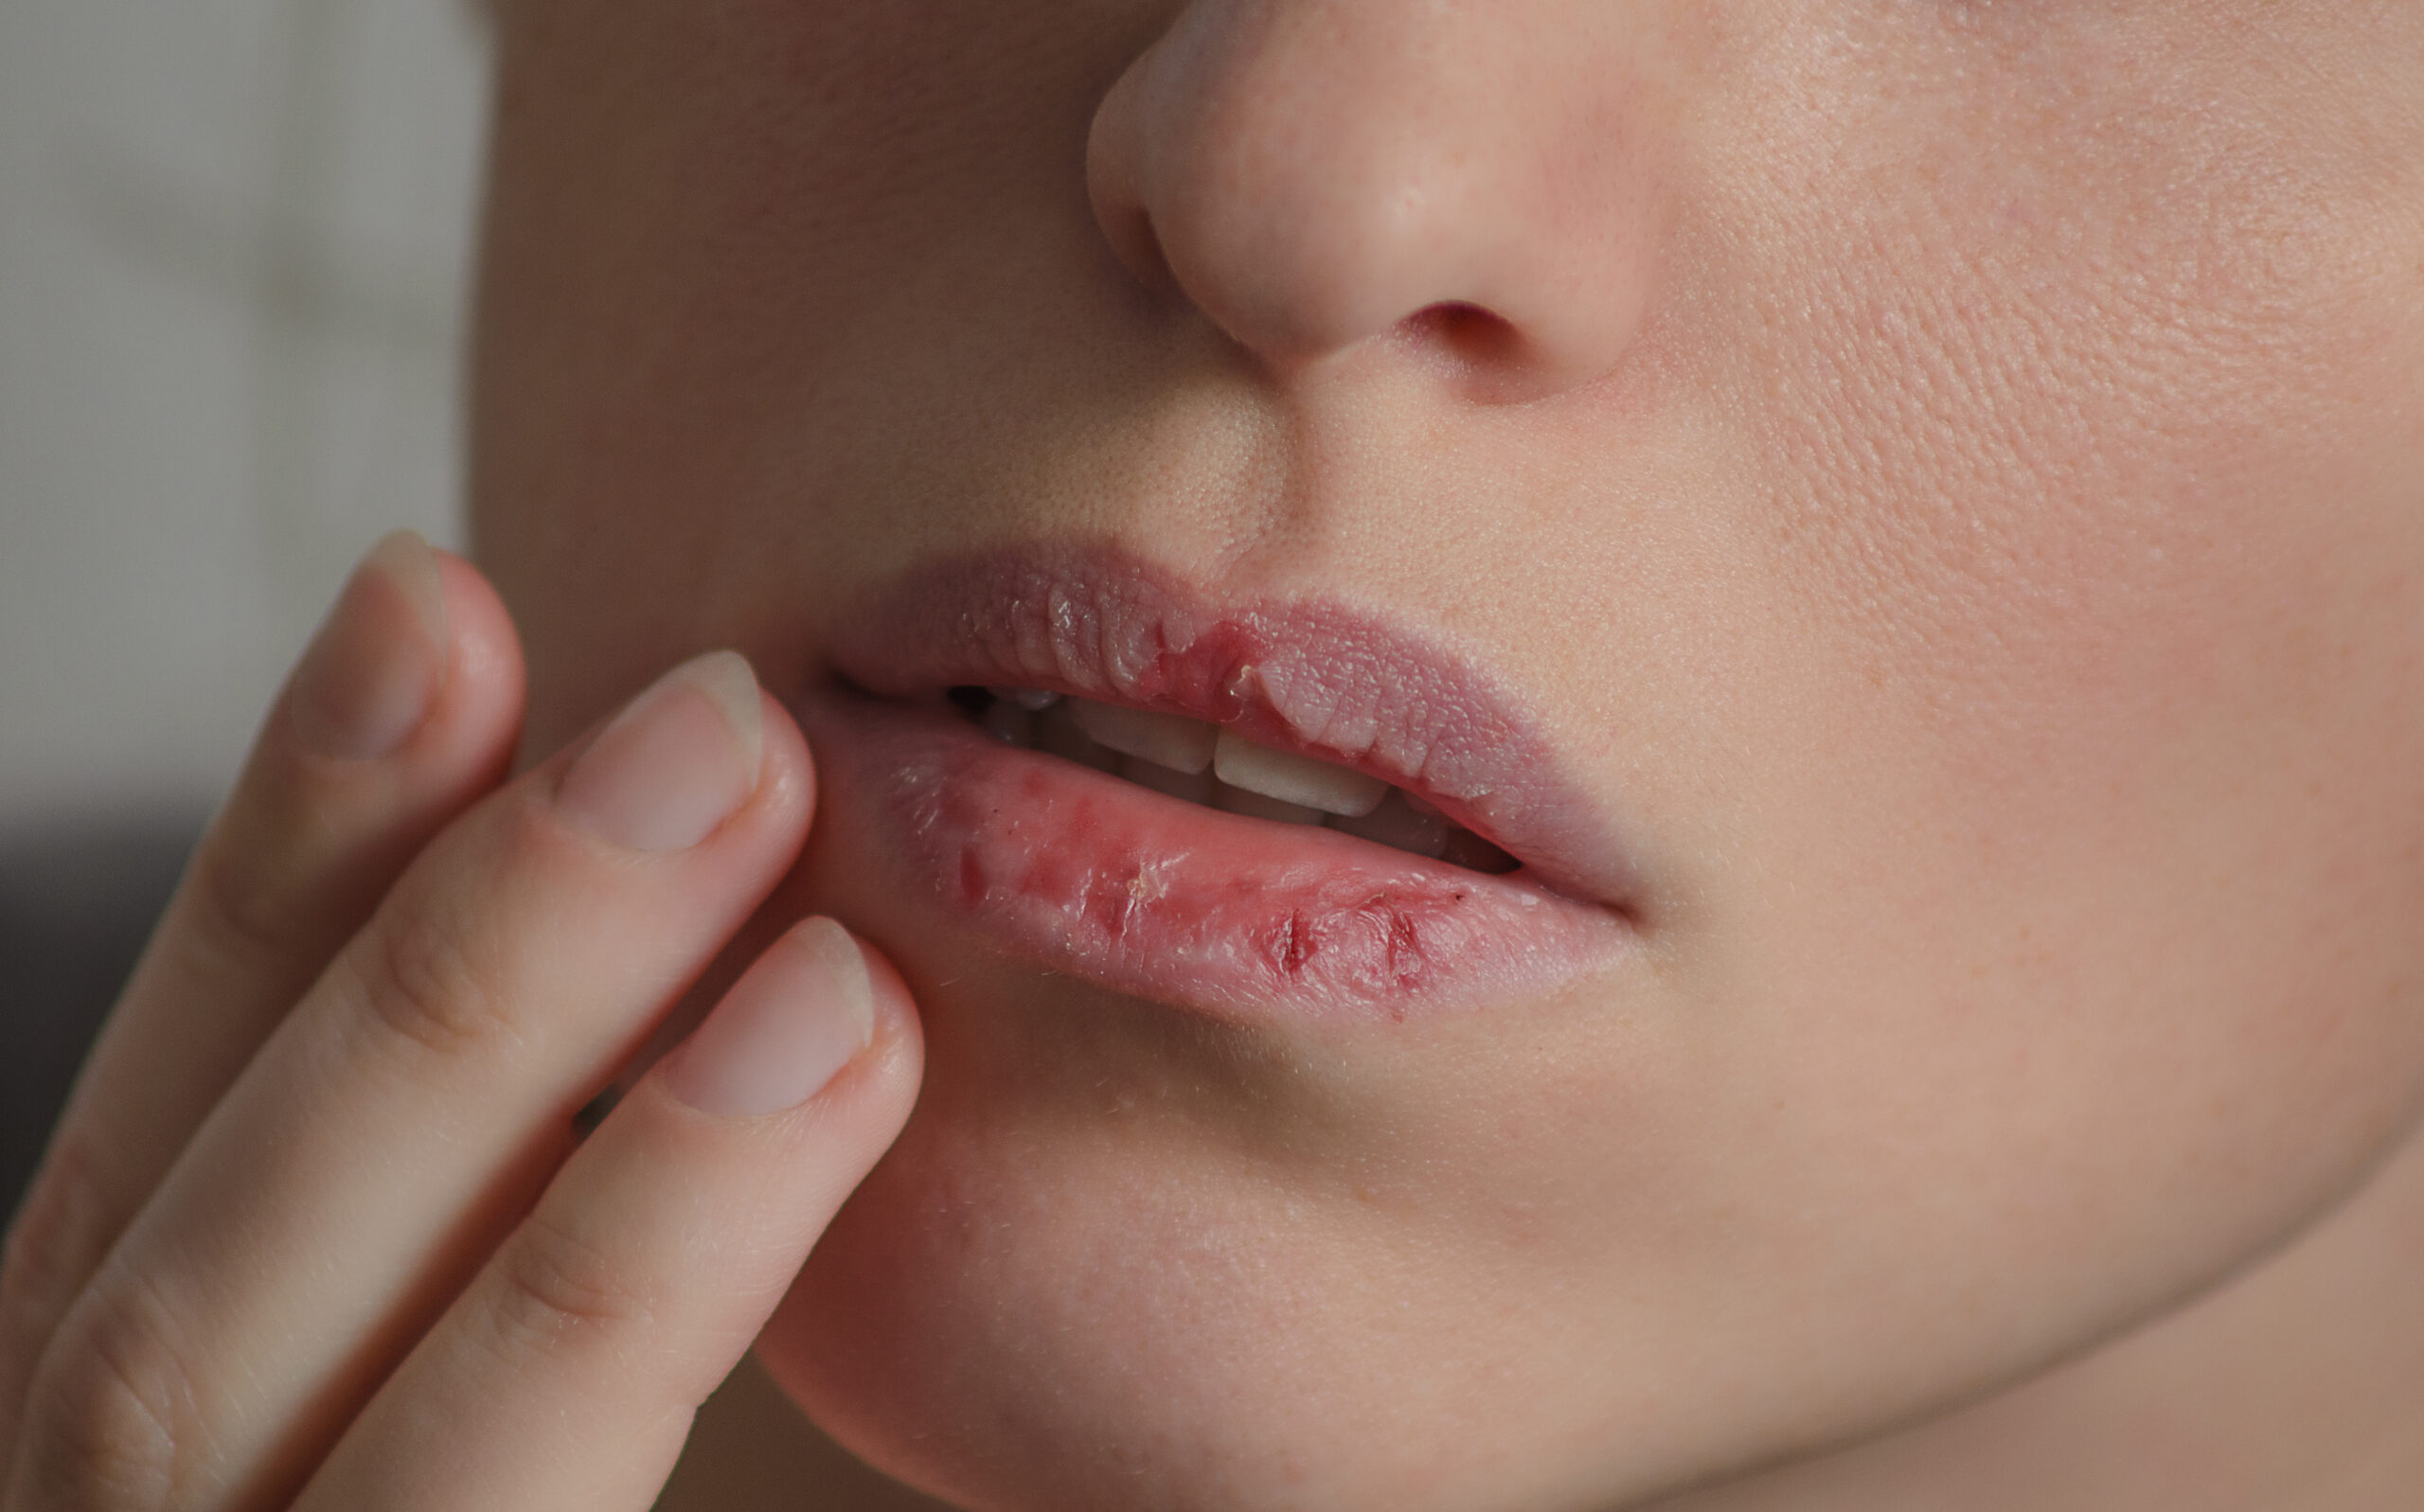 7 Dermatologist Tips For Healing Dry, Chapped Lips While it may seem that d...